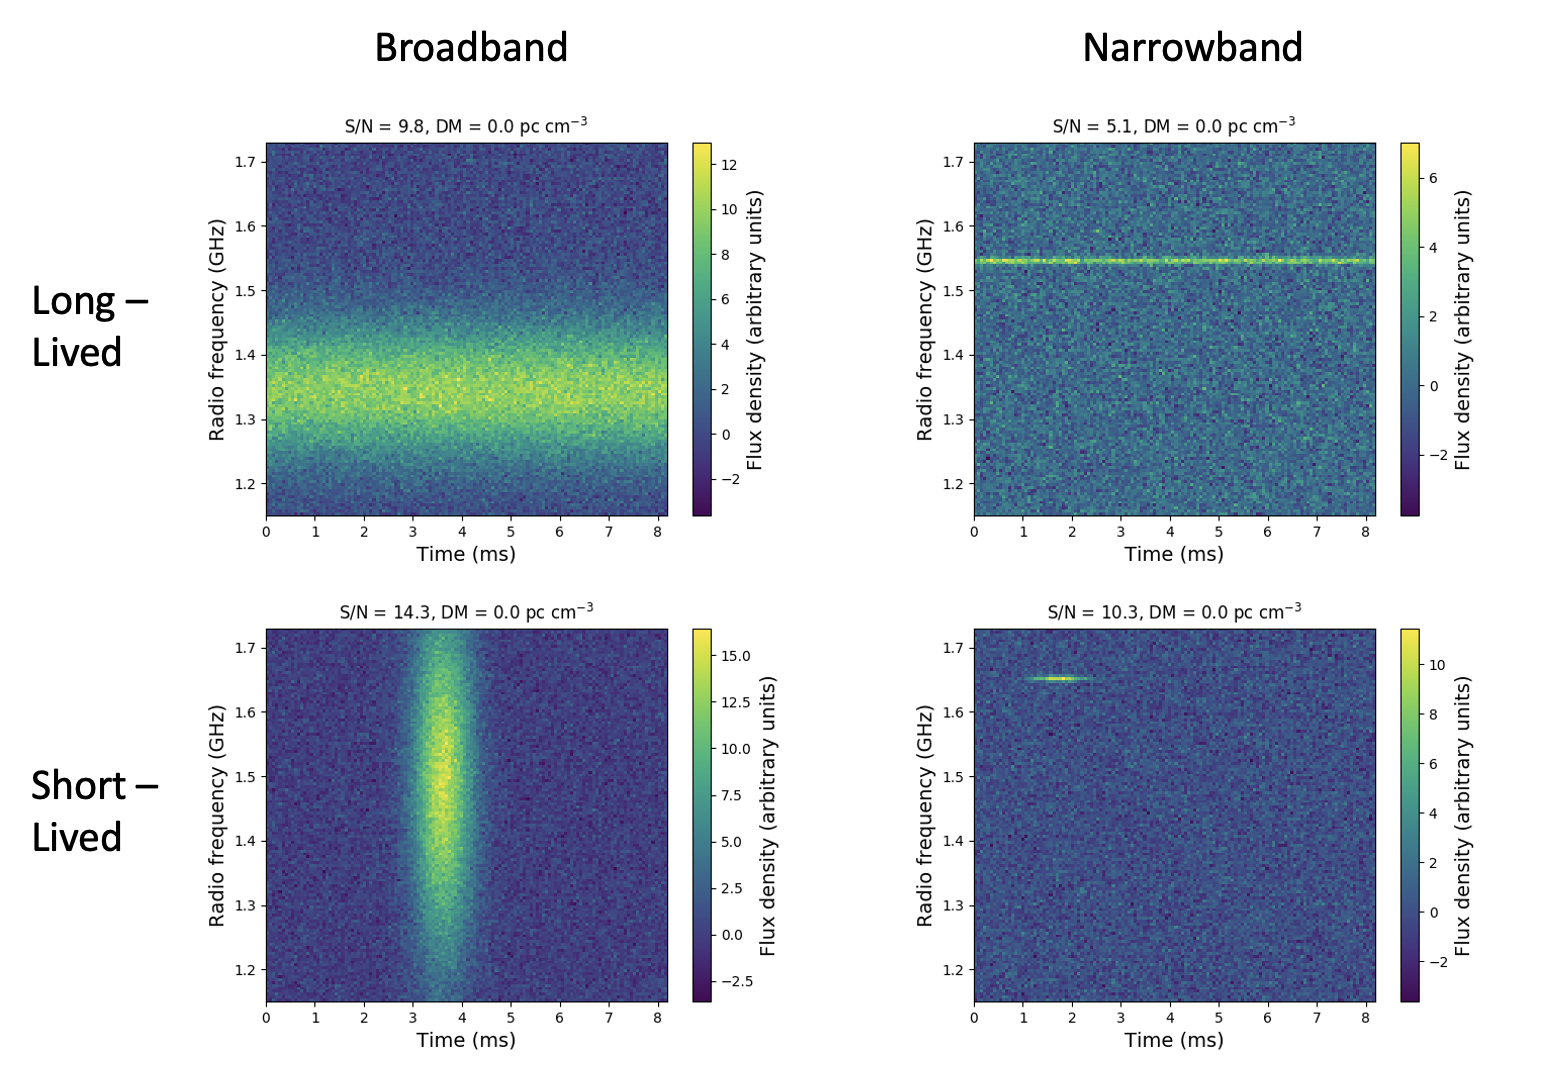 Sample frequency-time images of signals belonging to the ``llbb`` (top left), ``llnb`` (top right), ``slbb`` (bottom left) and ``slnb`` (bottom right) output classes.